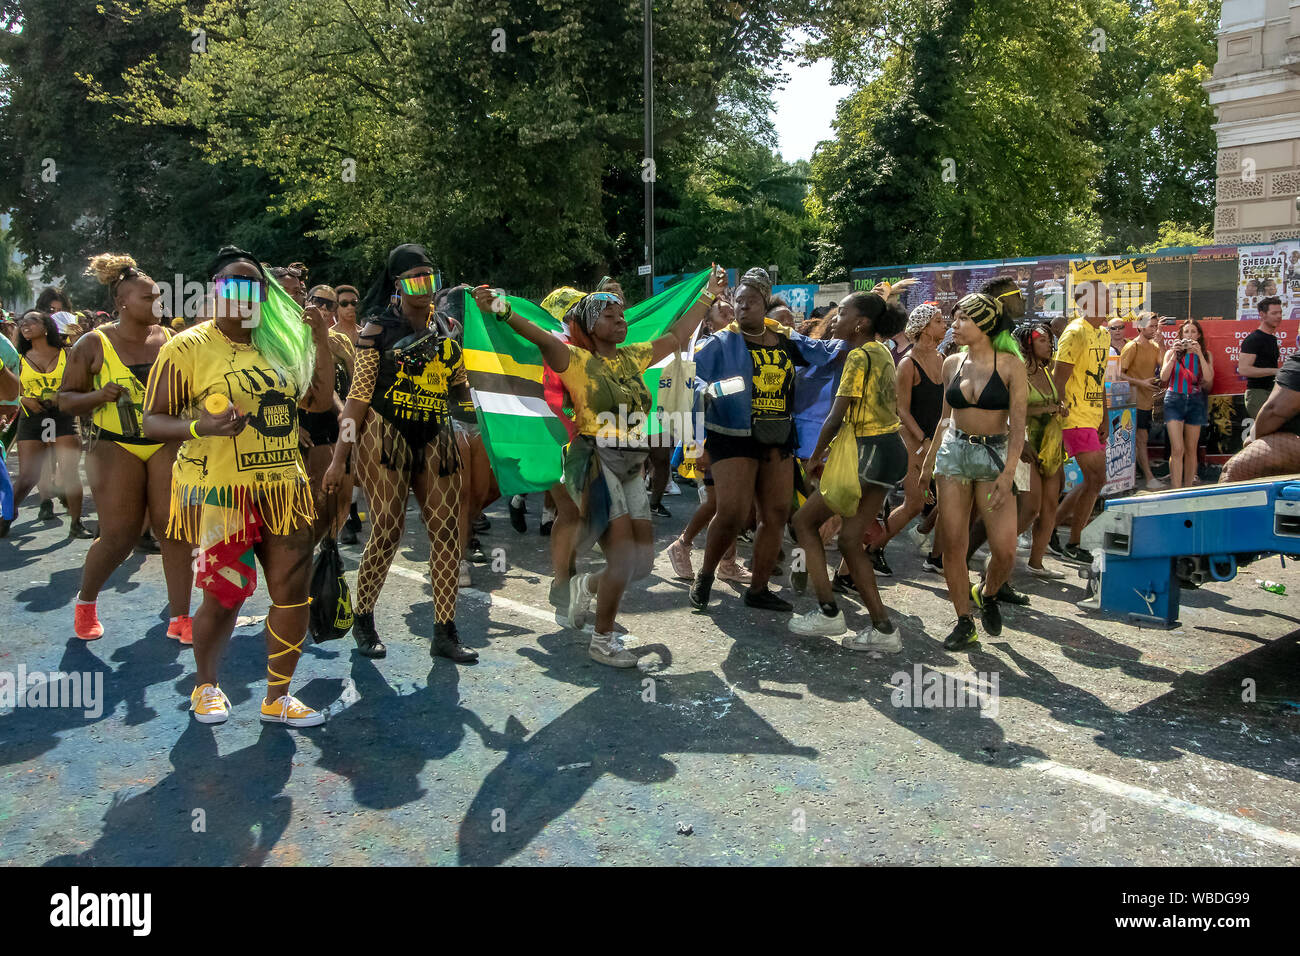 Masqueraders moving along a road during the celebration.The main events of Notting Hill Carnival 2019 got underway, with over a million revellers hitting the streets of West London, amongst floats, masqueraders, steel bands, and sound systems. Stock Photo